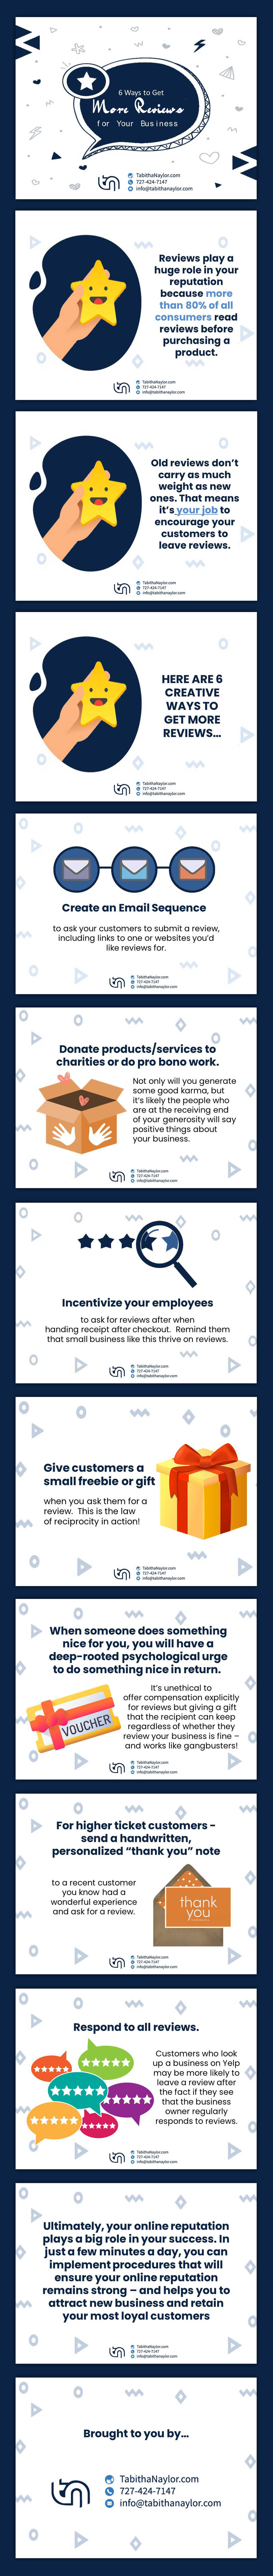 6-Ways-to-Get-More-Reviews-for-Your-Business 